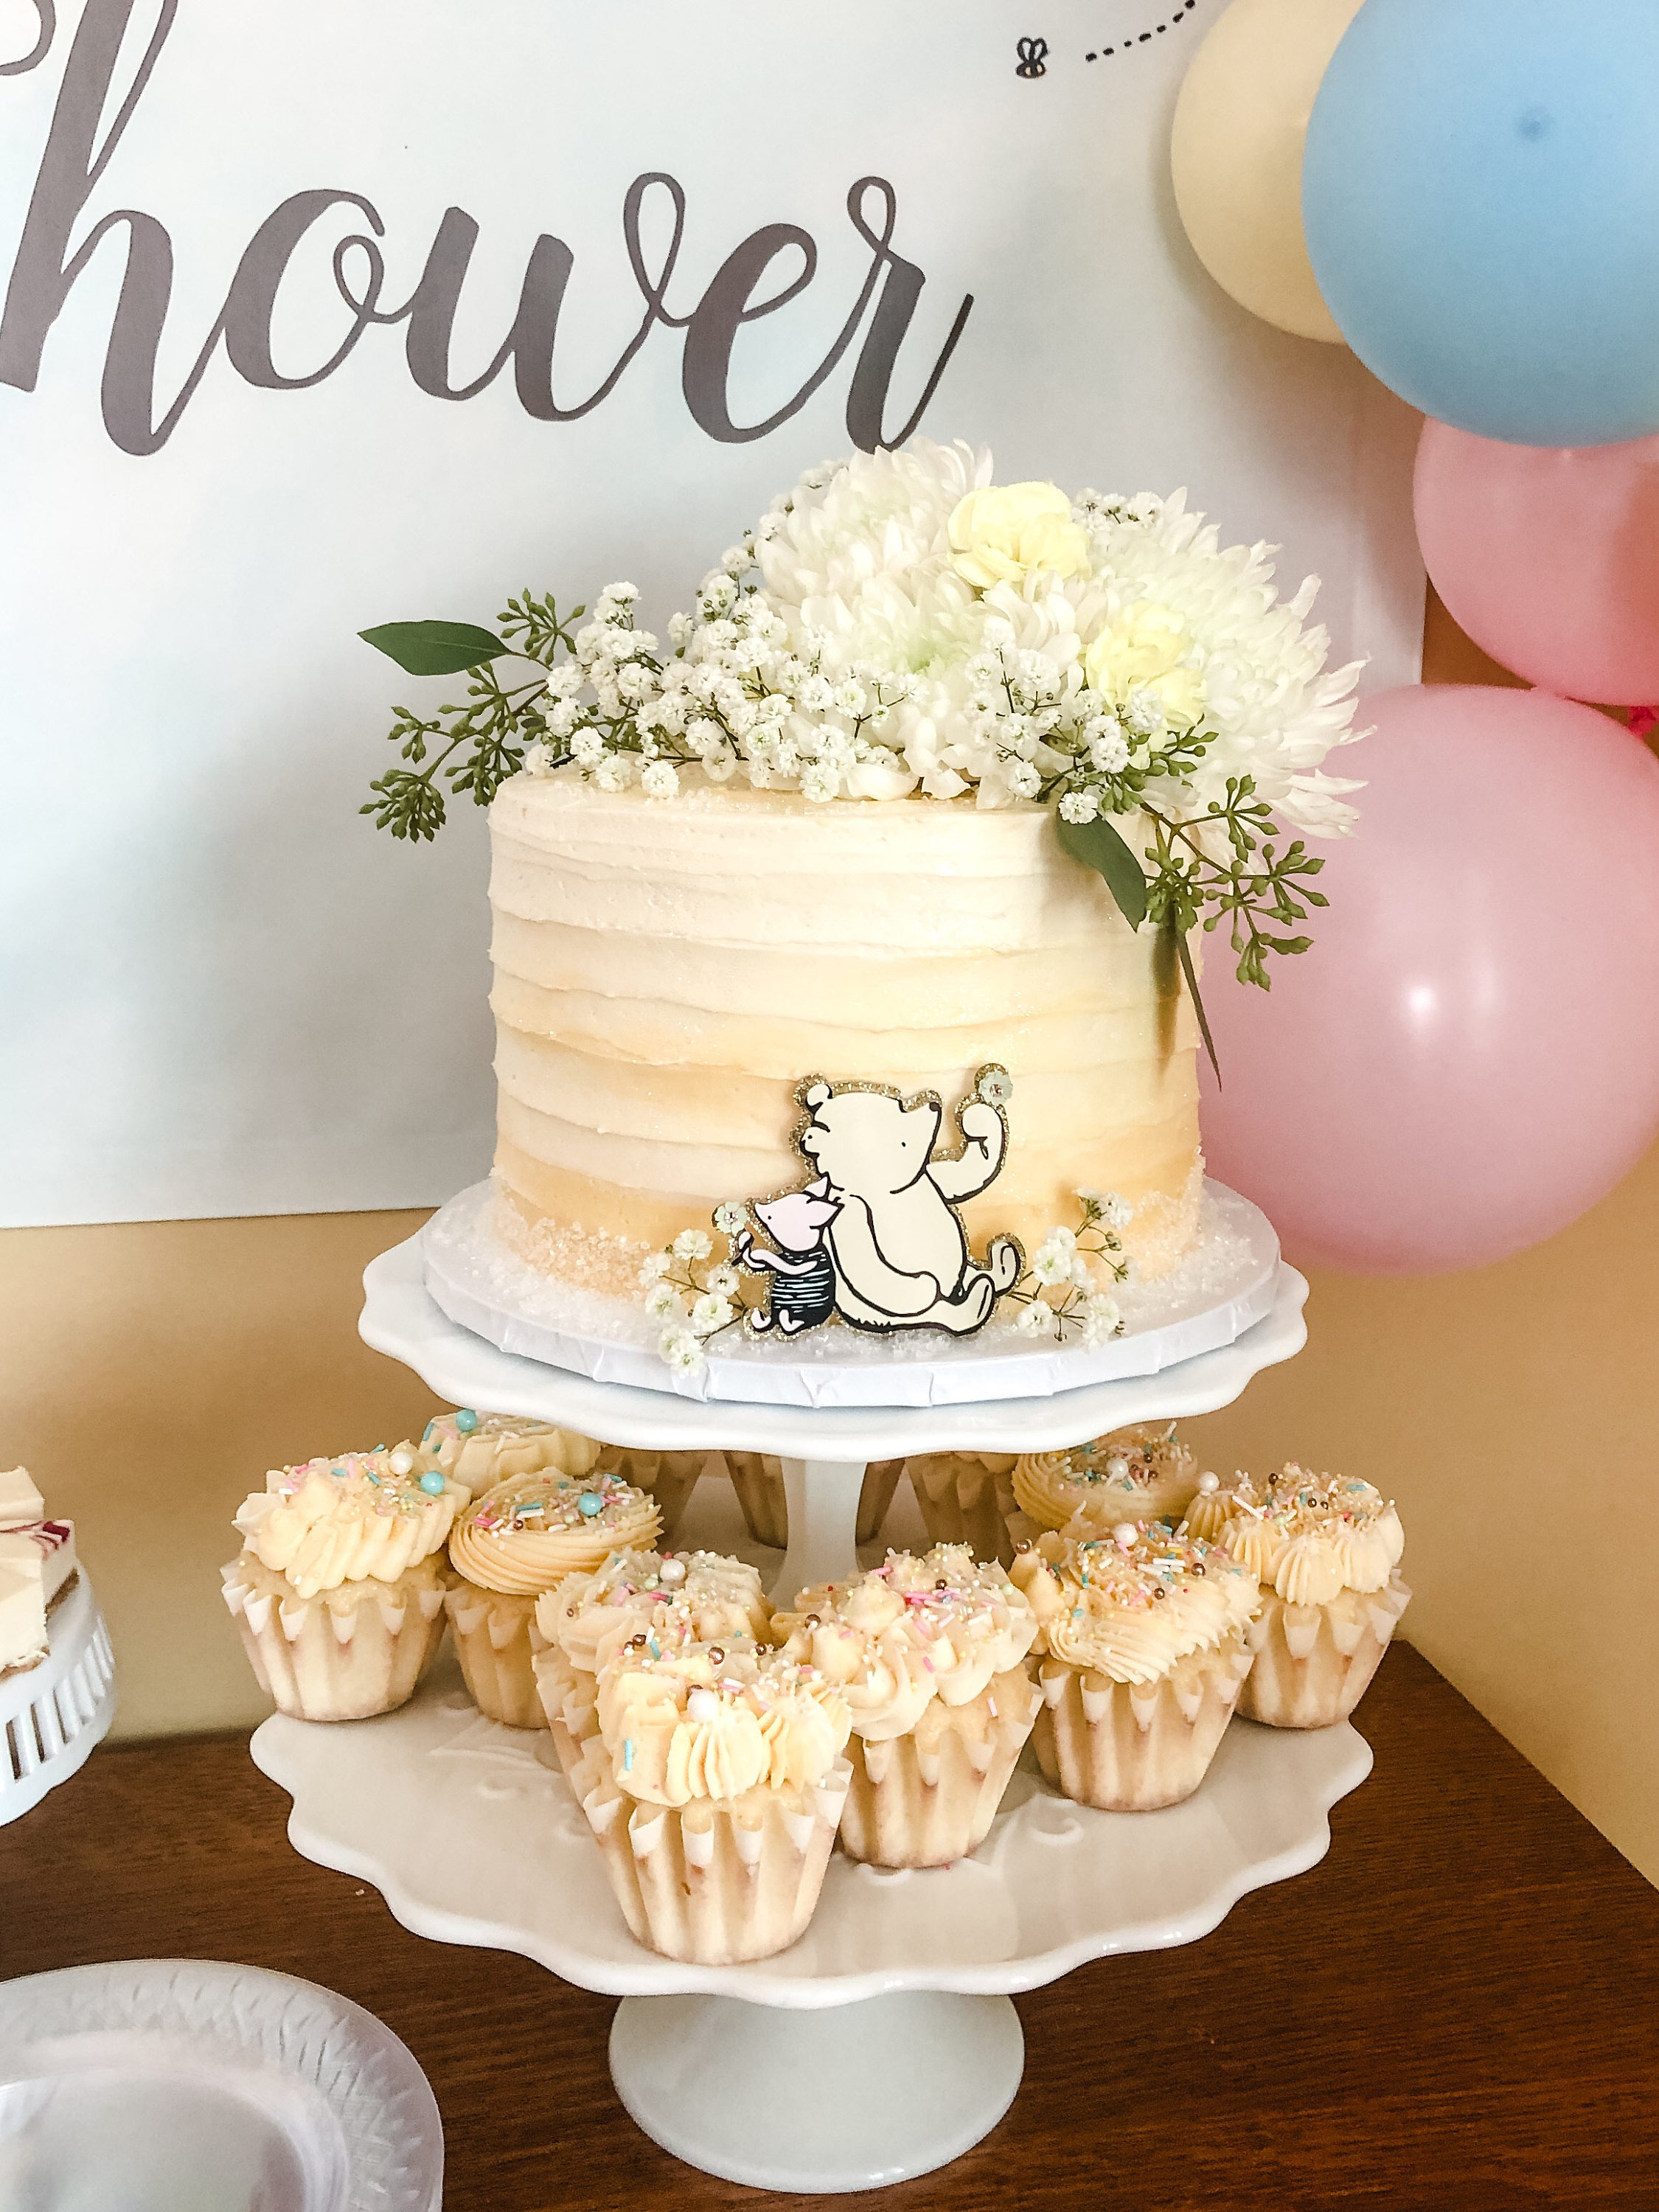 Personalised Winnie the Pooh Cake Decorations, Childrens Birthday Party  Cake Toppers, Wood Cake Decoration, Customisable Cake Topper 5 Pcs 